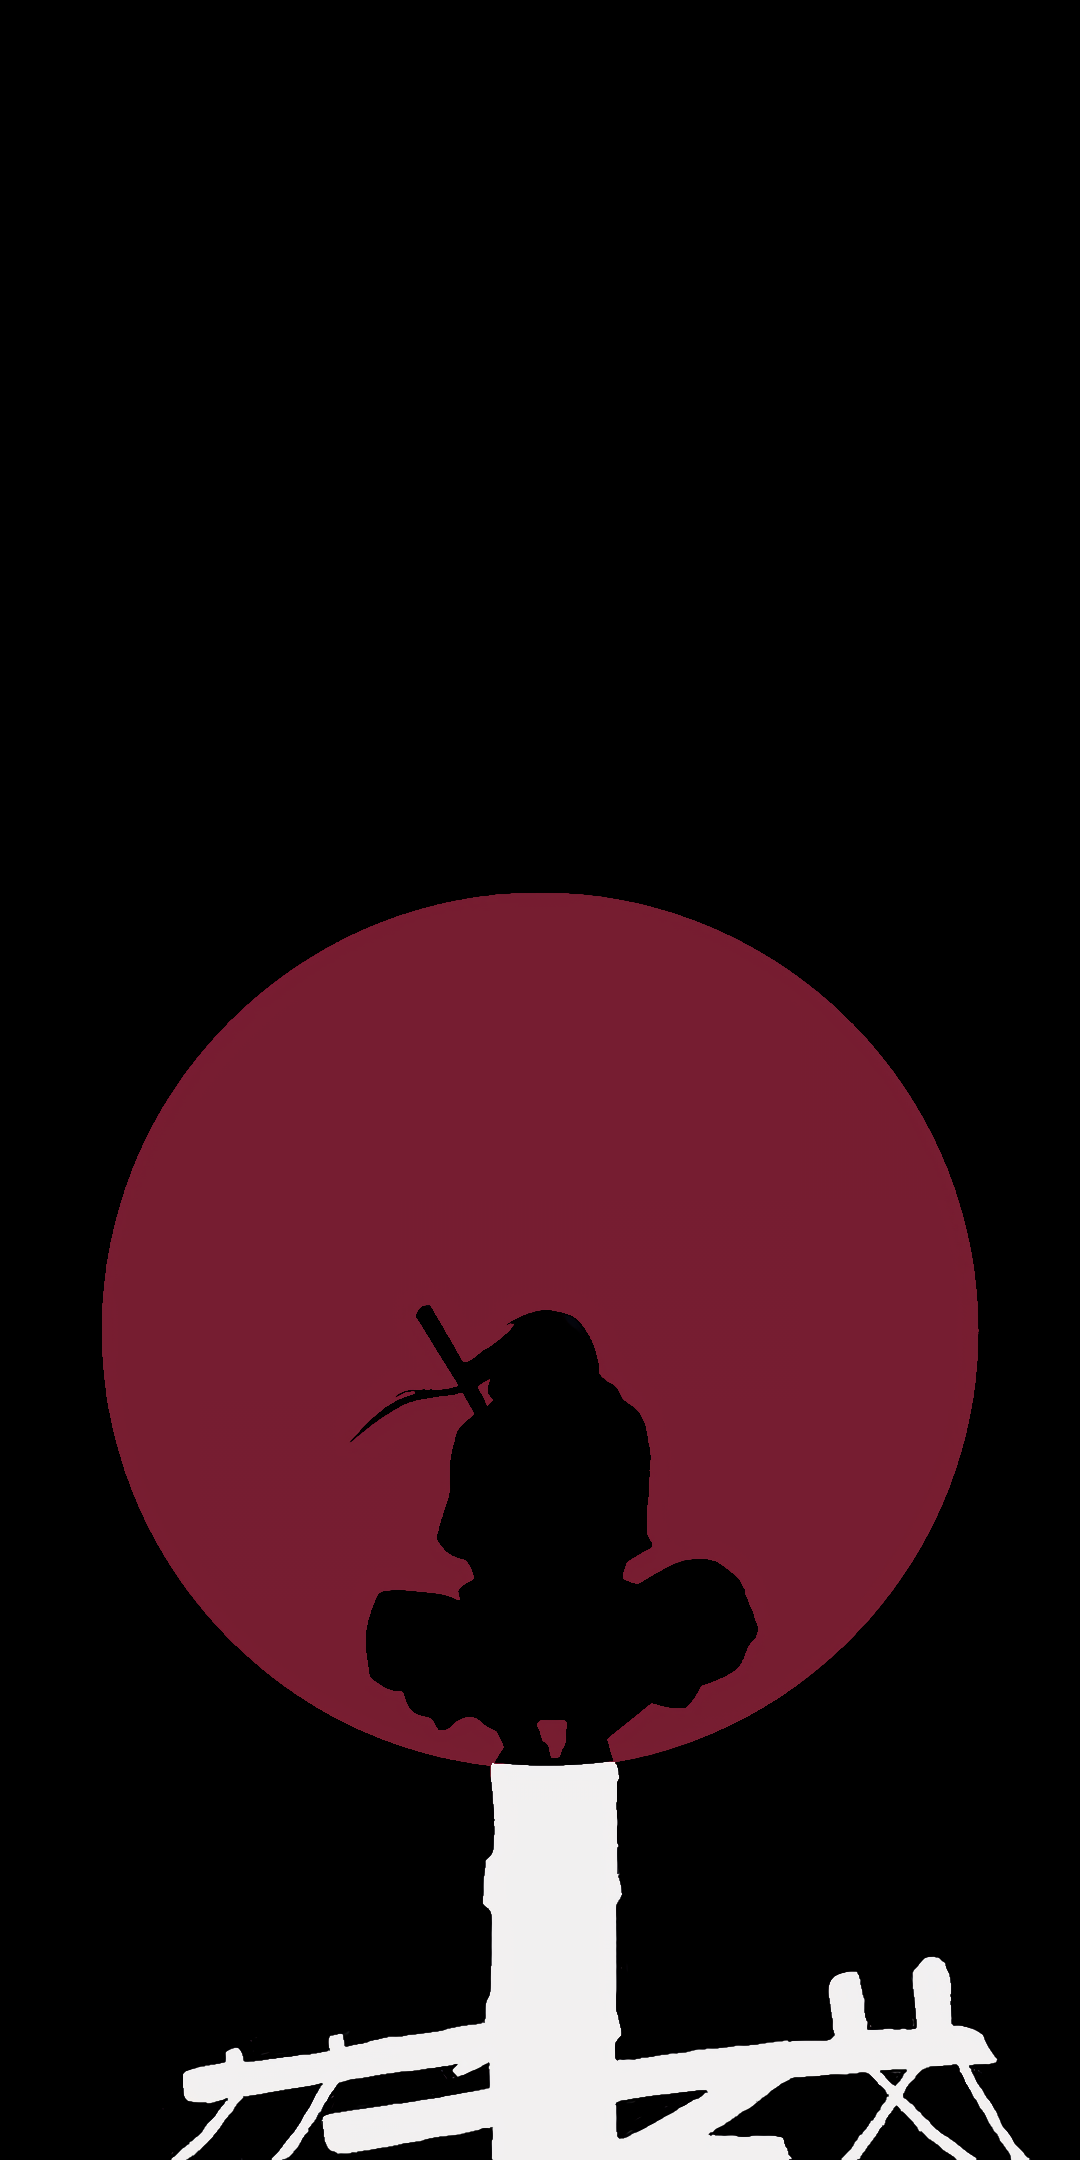 OC Yet another minimalist Itachi wallpaper. Made the moon red and pole white to resemble the Uchiha crest